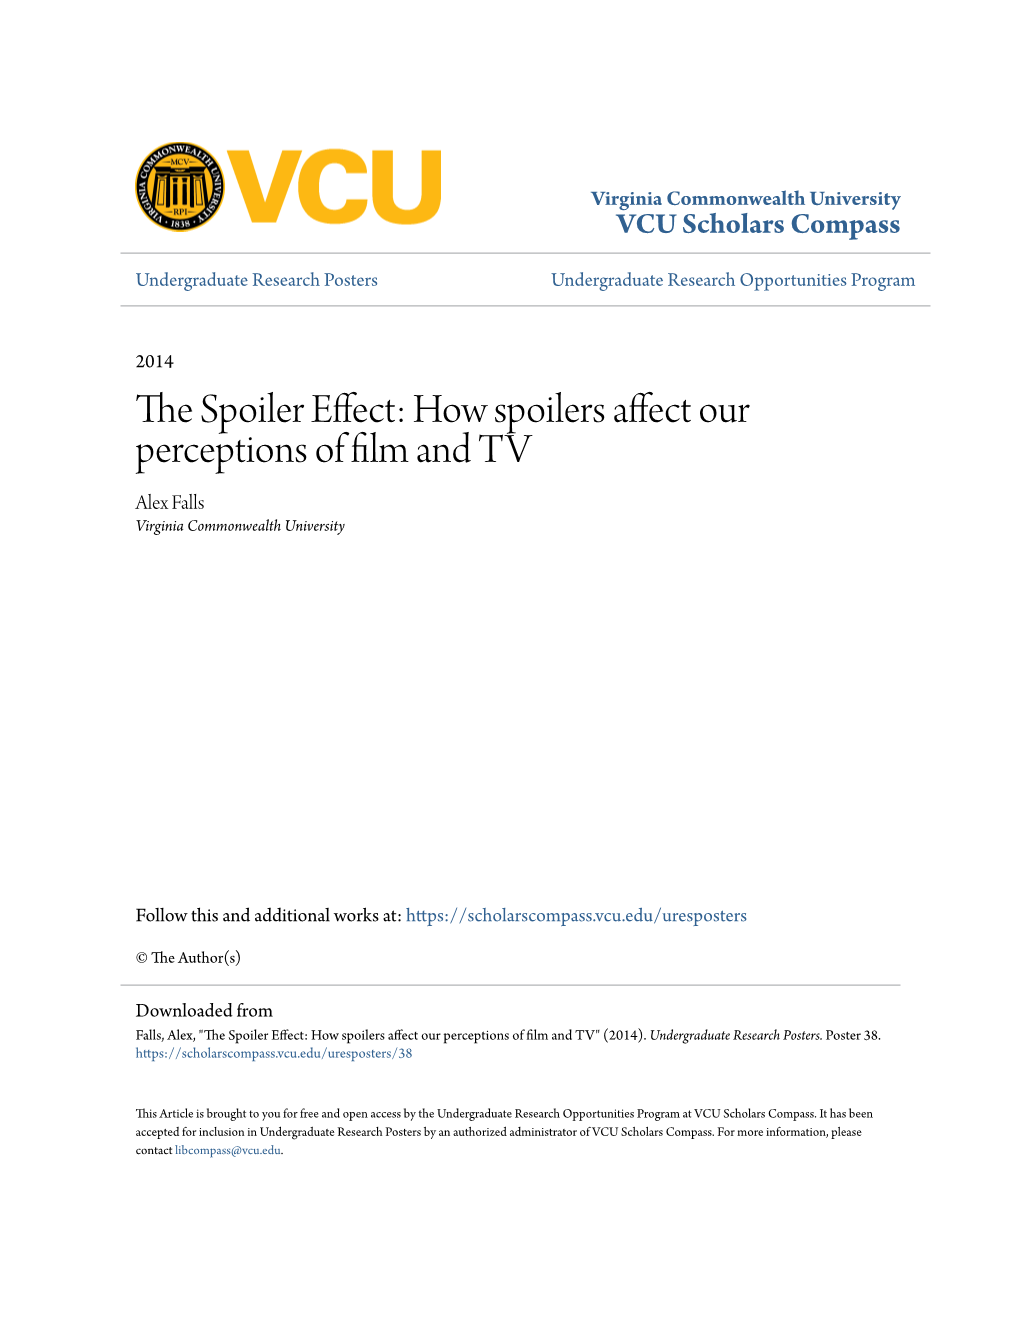 The Spoiler Effect: How Spoilers Affect Our Perceptions of Film and TV